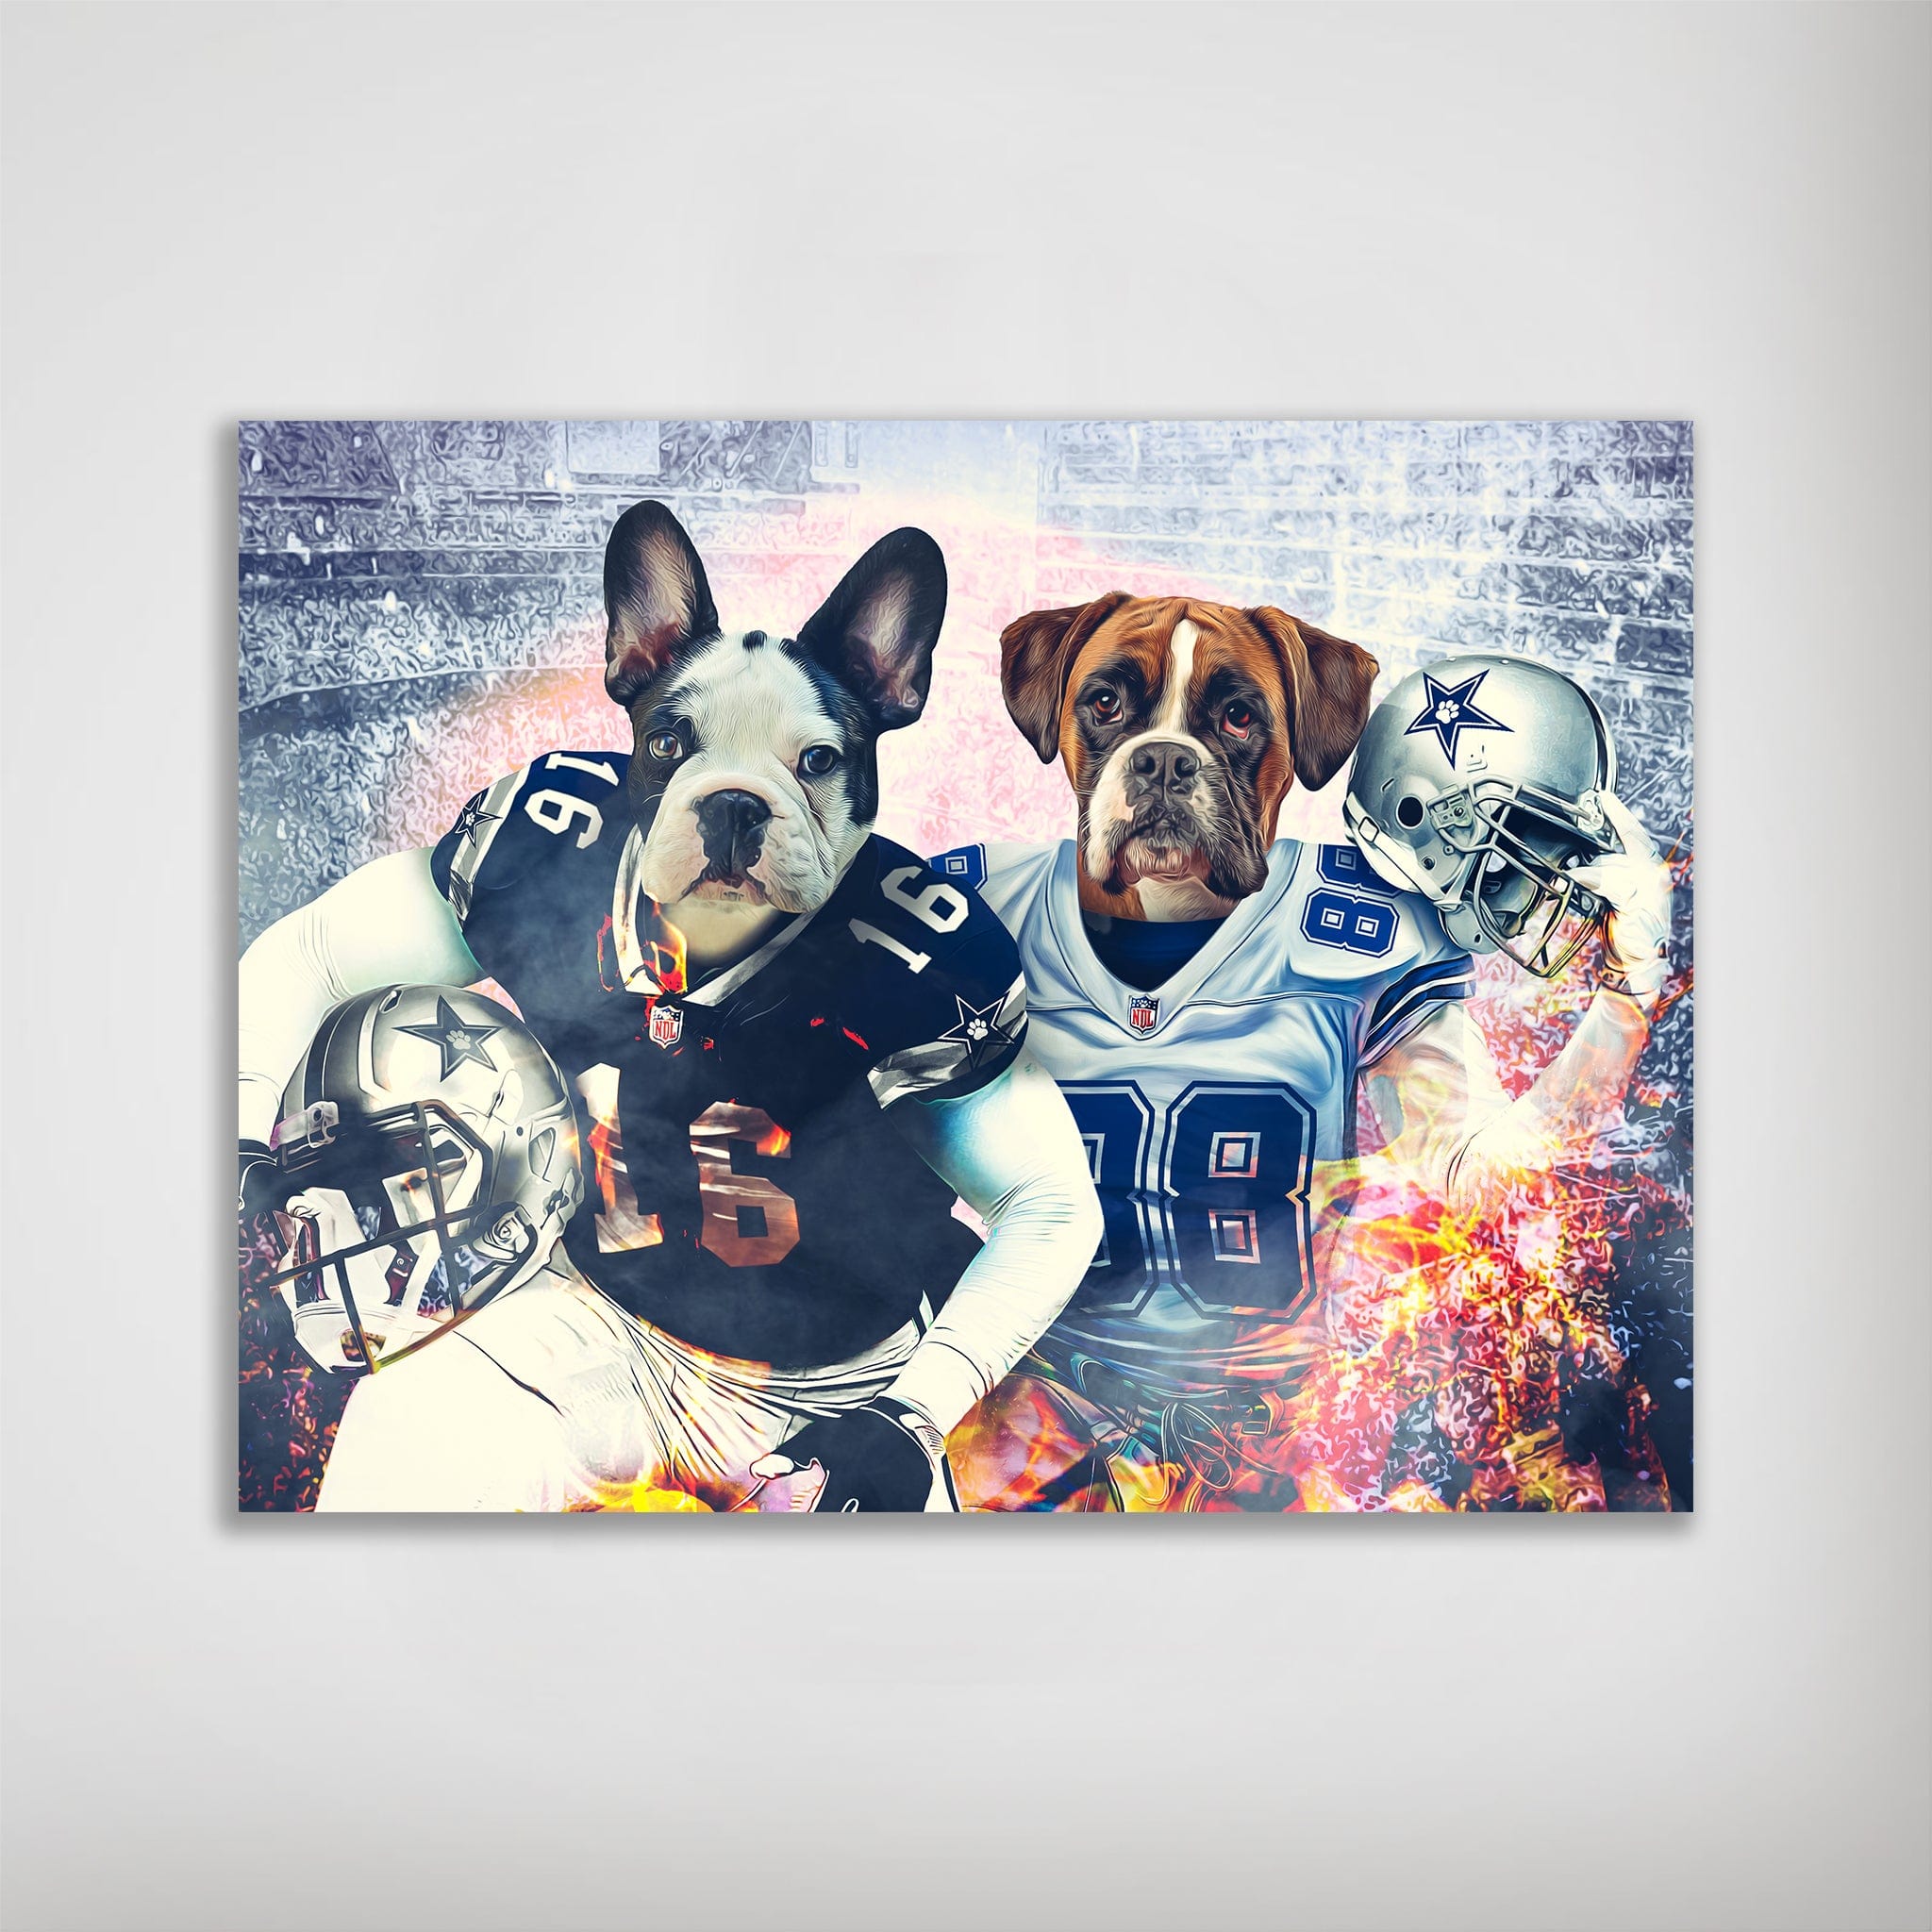 USA MADE Personalized Football Pet Portrait | 'Dallas Dog' Personalized 2 Pet Poster| Custom Football Pet Portrait Wallart, Canvas, Poster, Digital Download | Dog Mom, Dog Dad Gifts